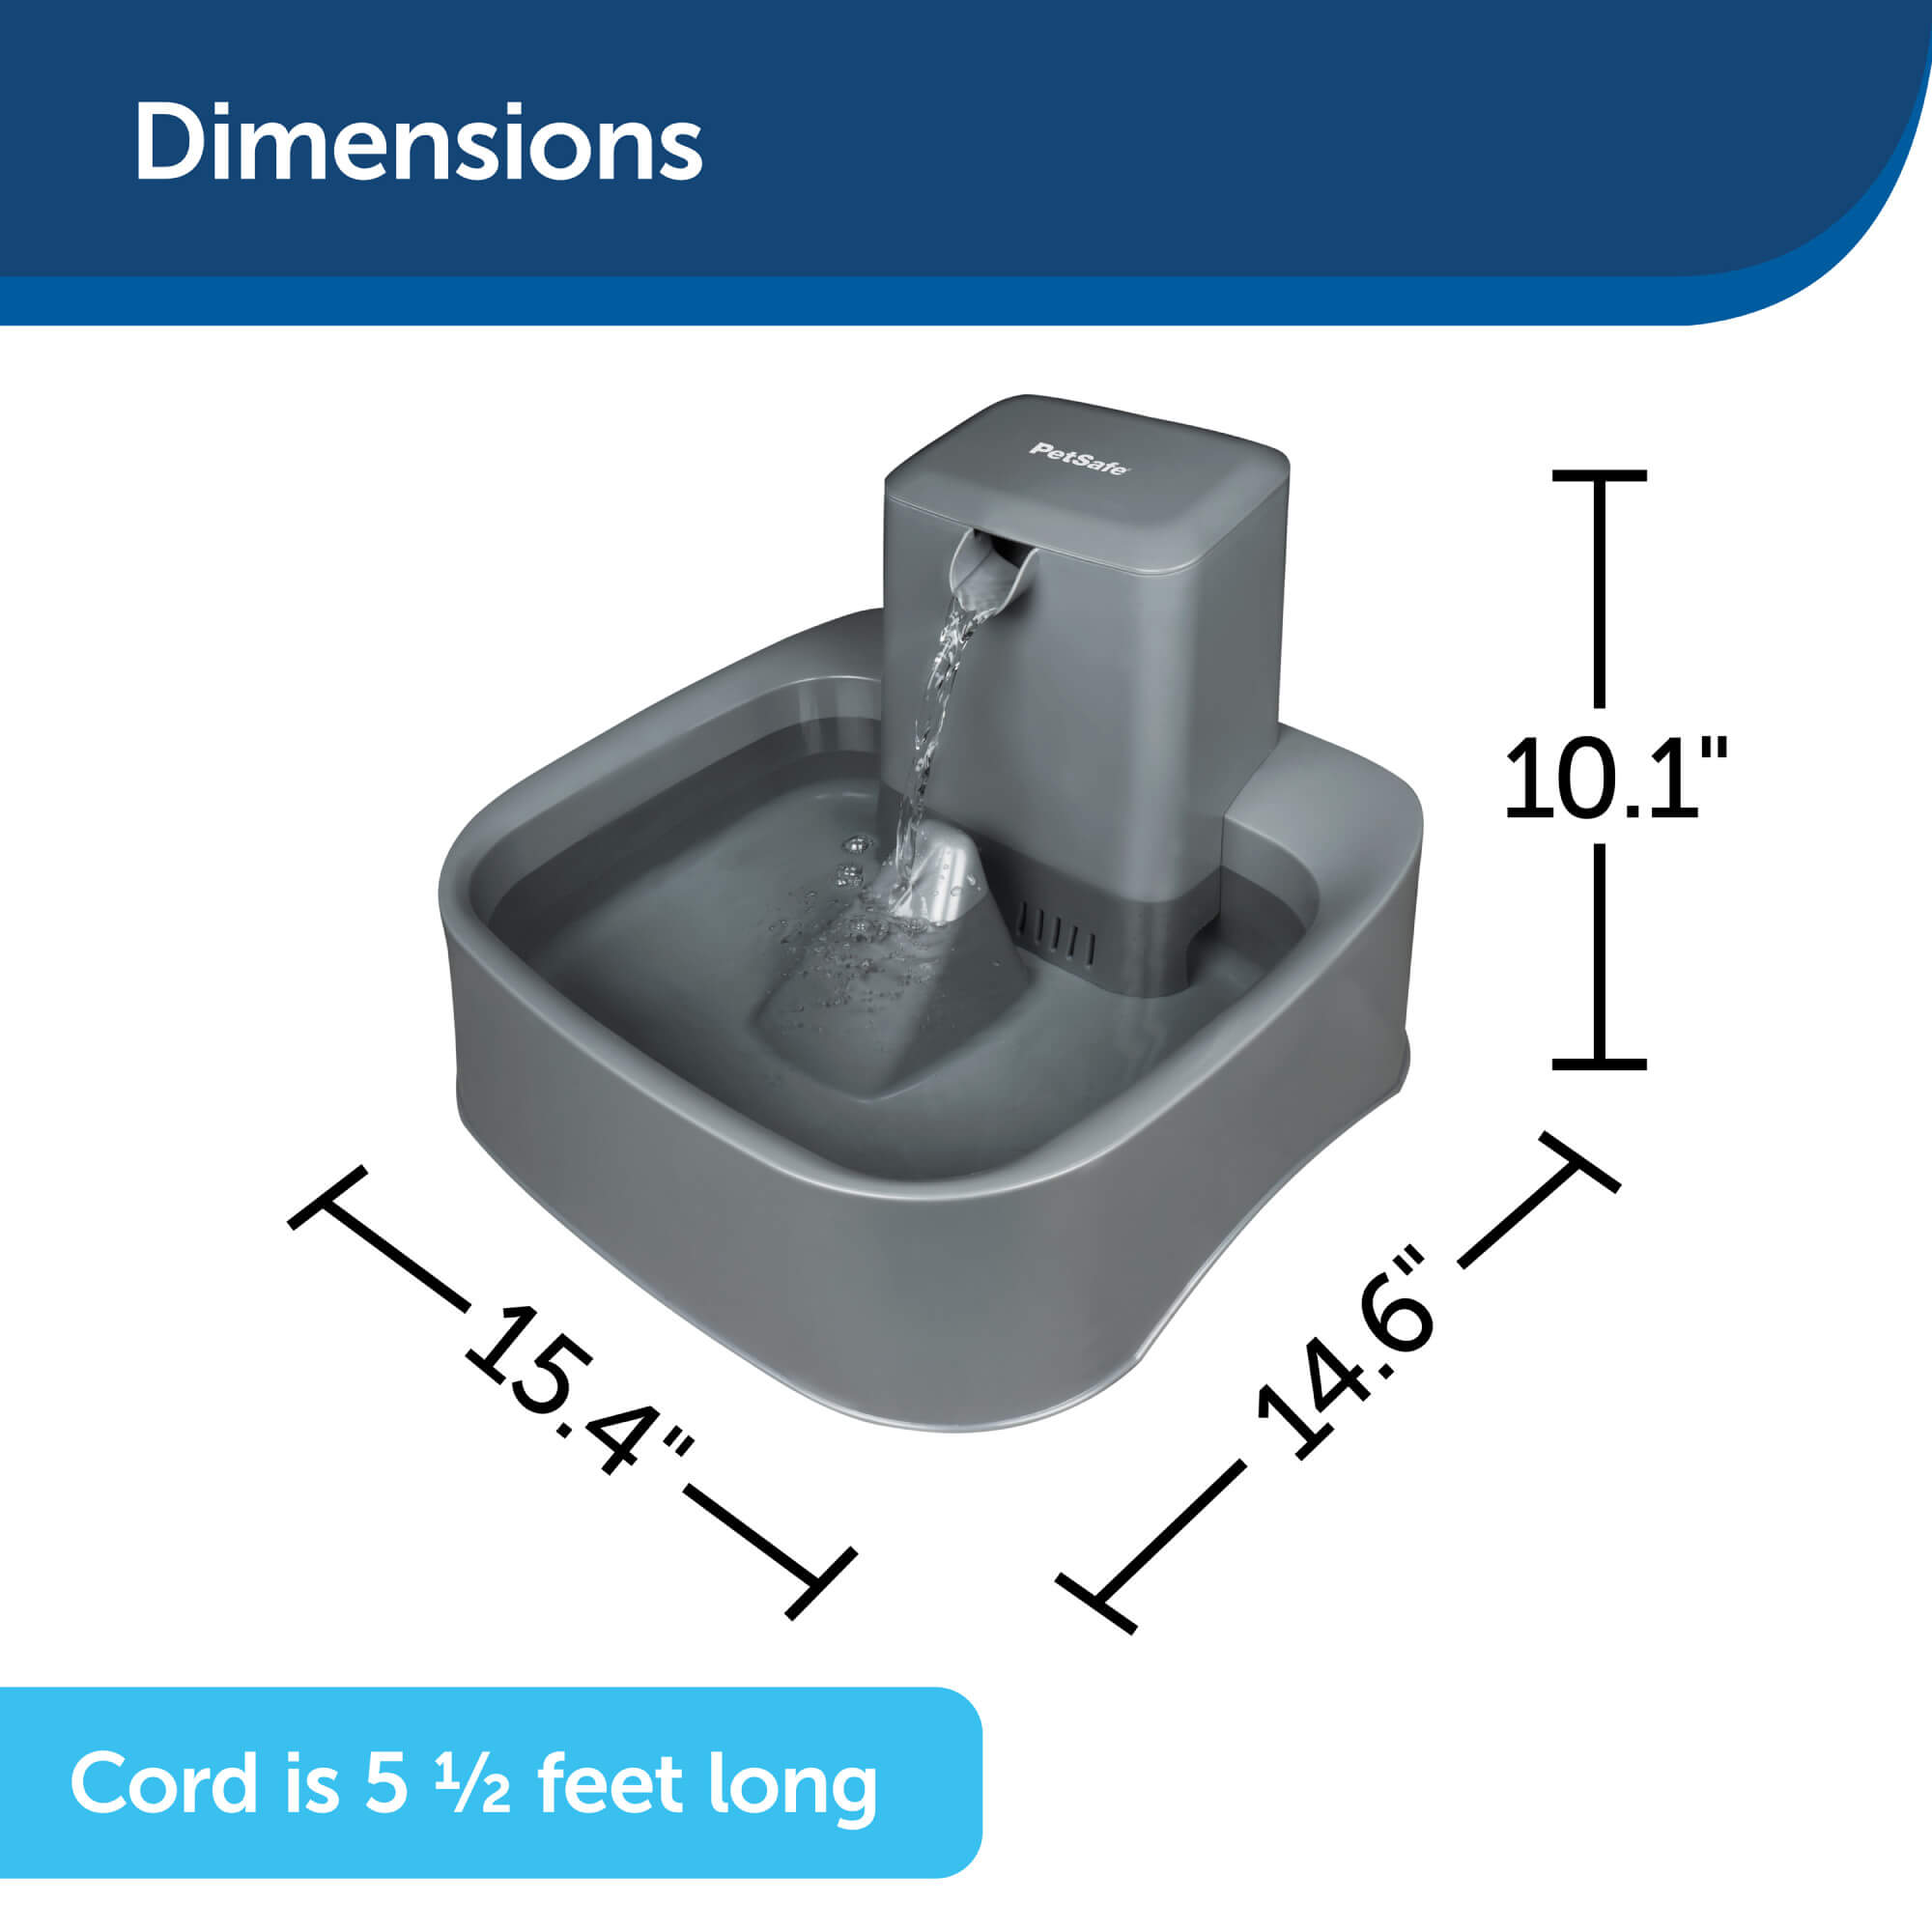 Drinkwell Pet Fountain Dimensions